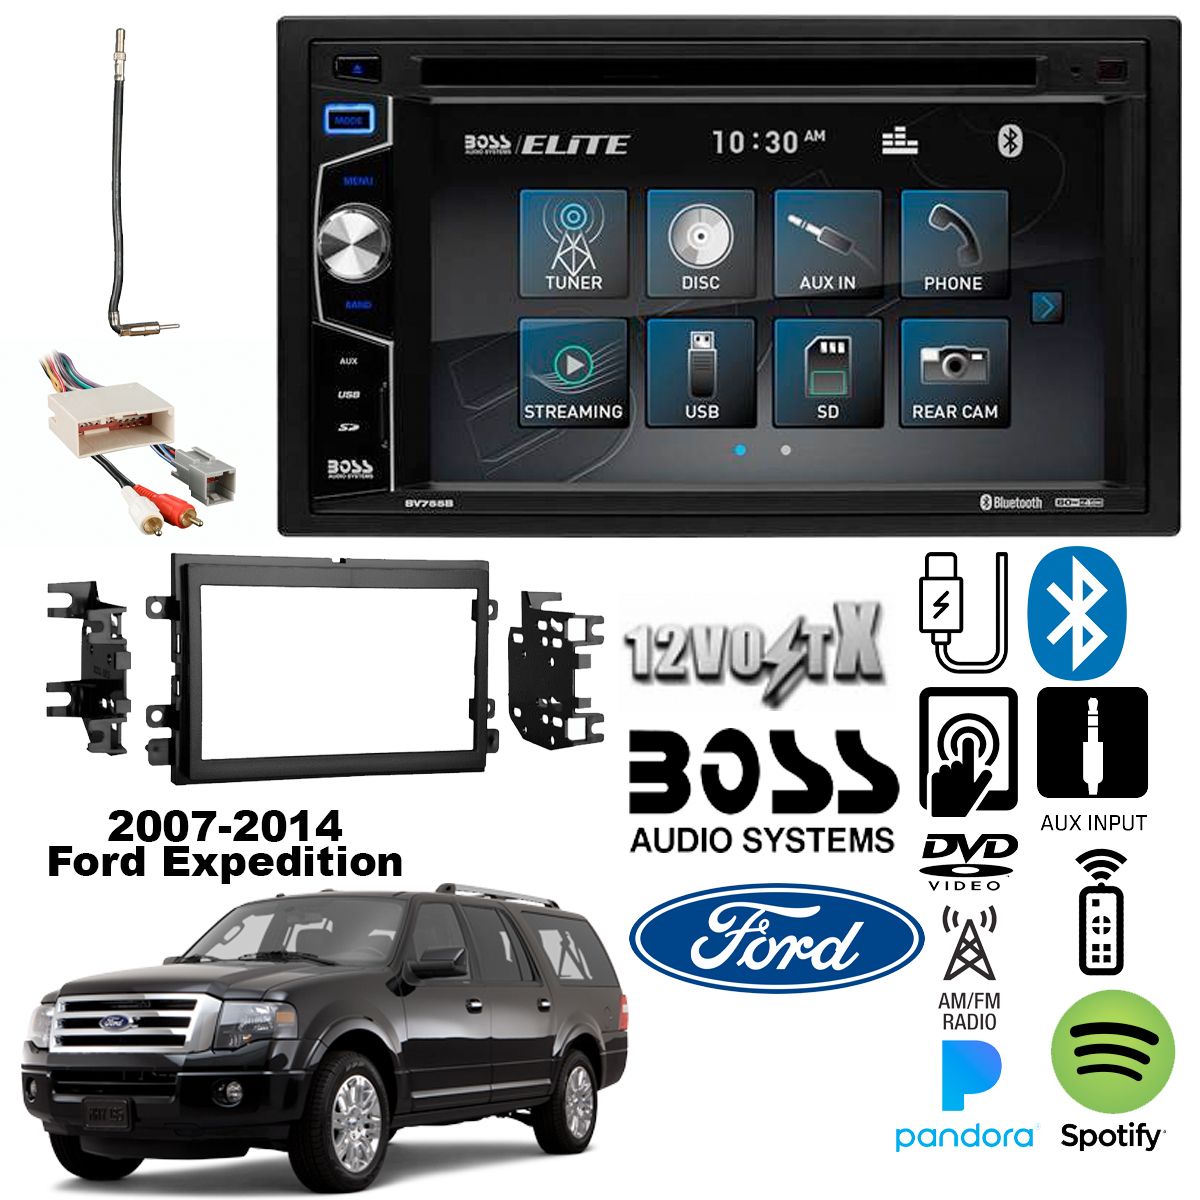 Fits Ford Expedition 2007-14 2-DIN, DVD Player 6.2" Touchscreen Bluetooth Radio!